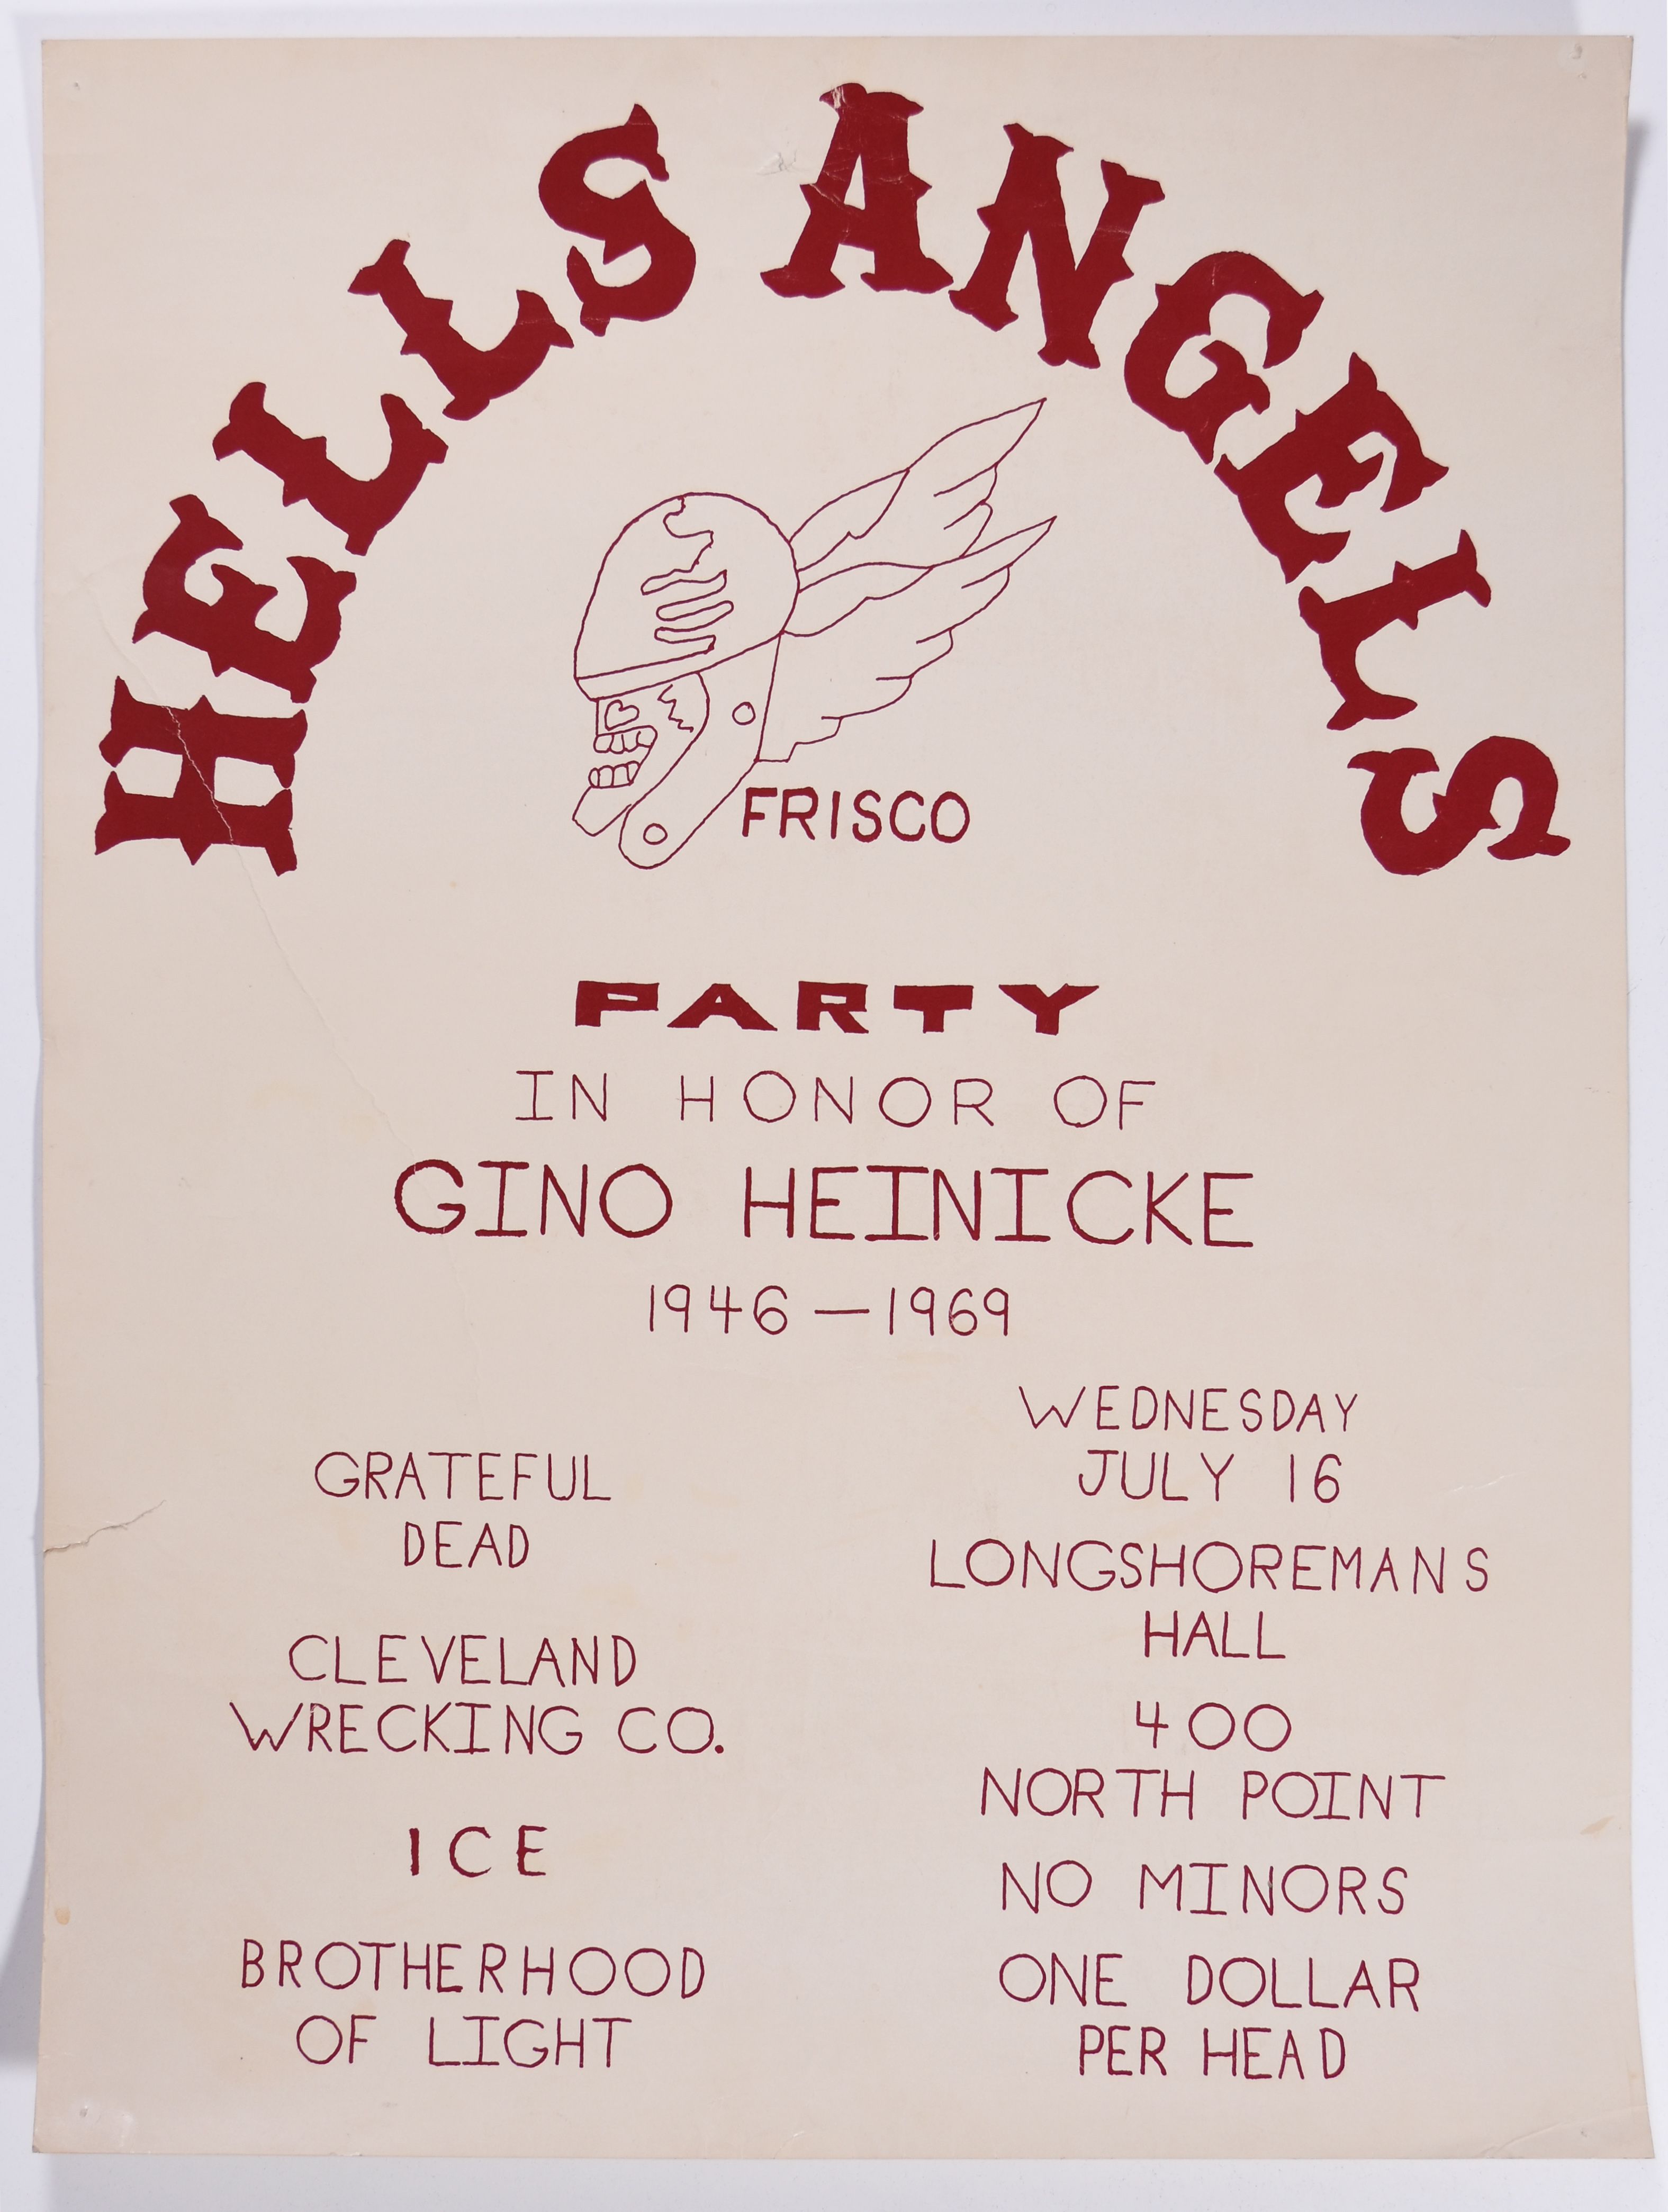 Grateful Dead "Hells Angels Party for Gino Heinicke" Longshoreman's Hall 1969 Concert Poster